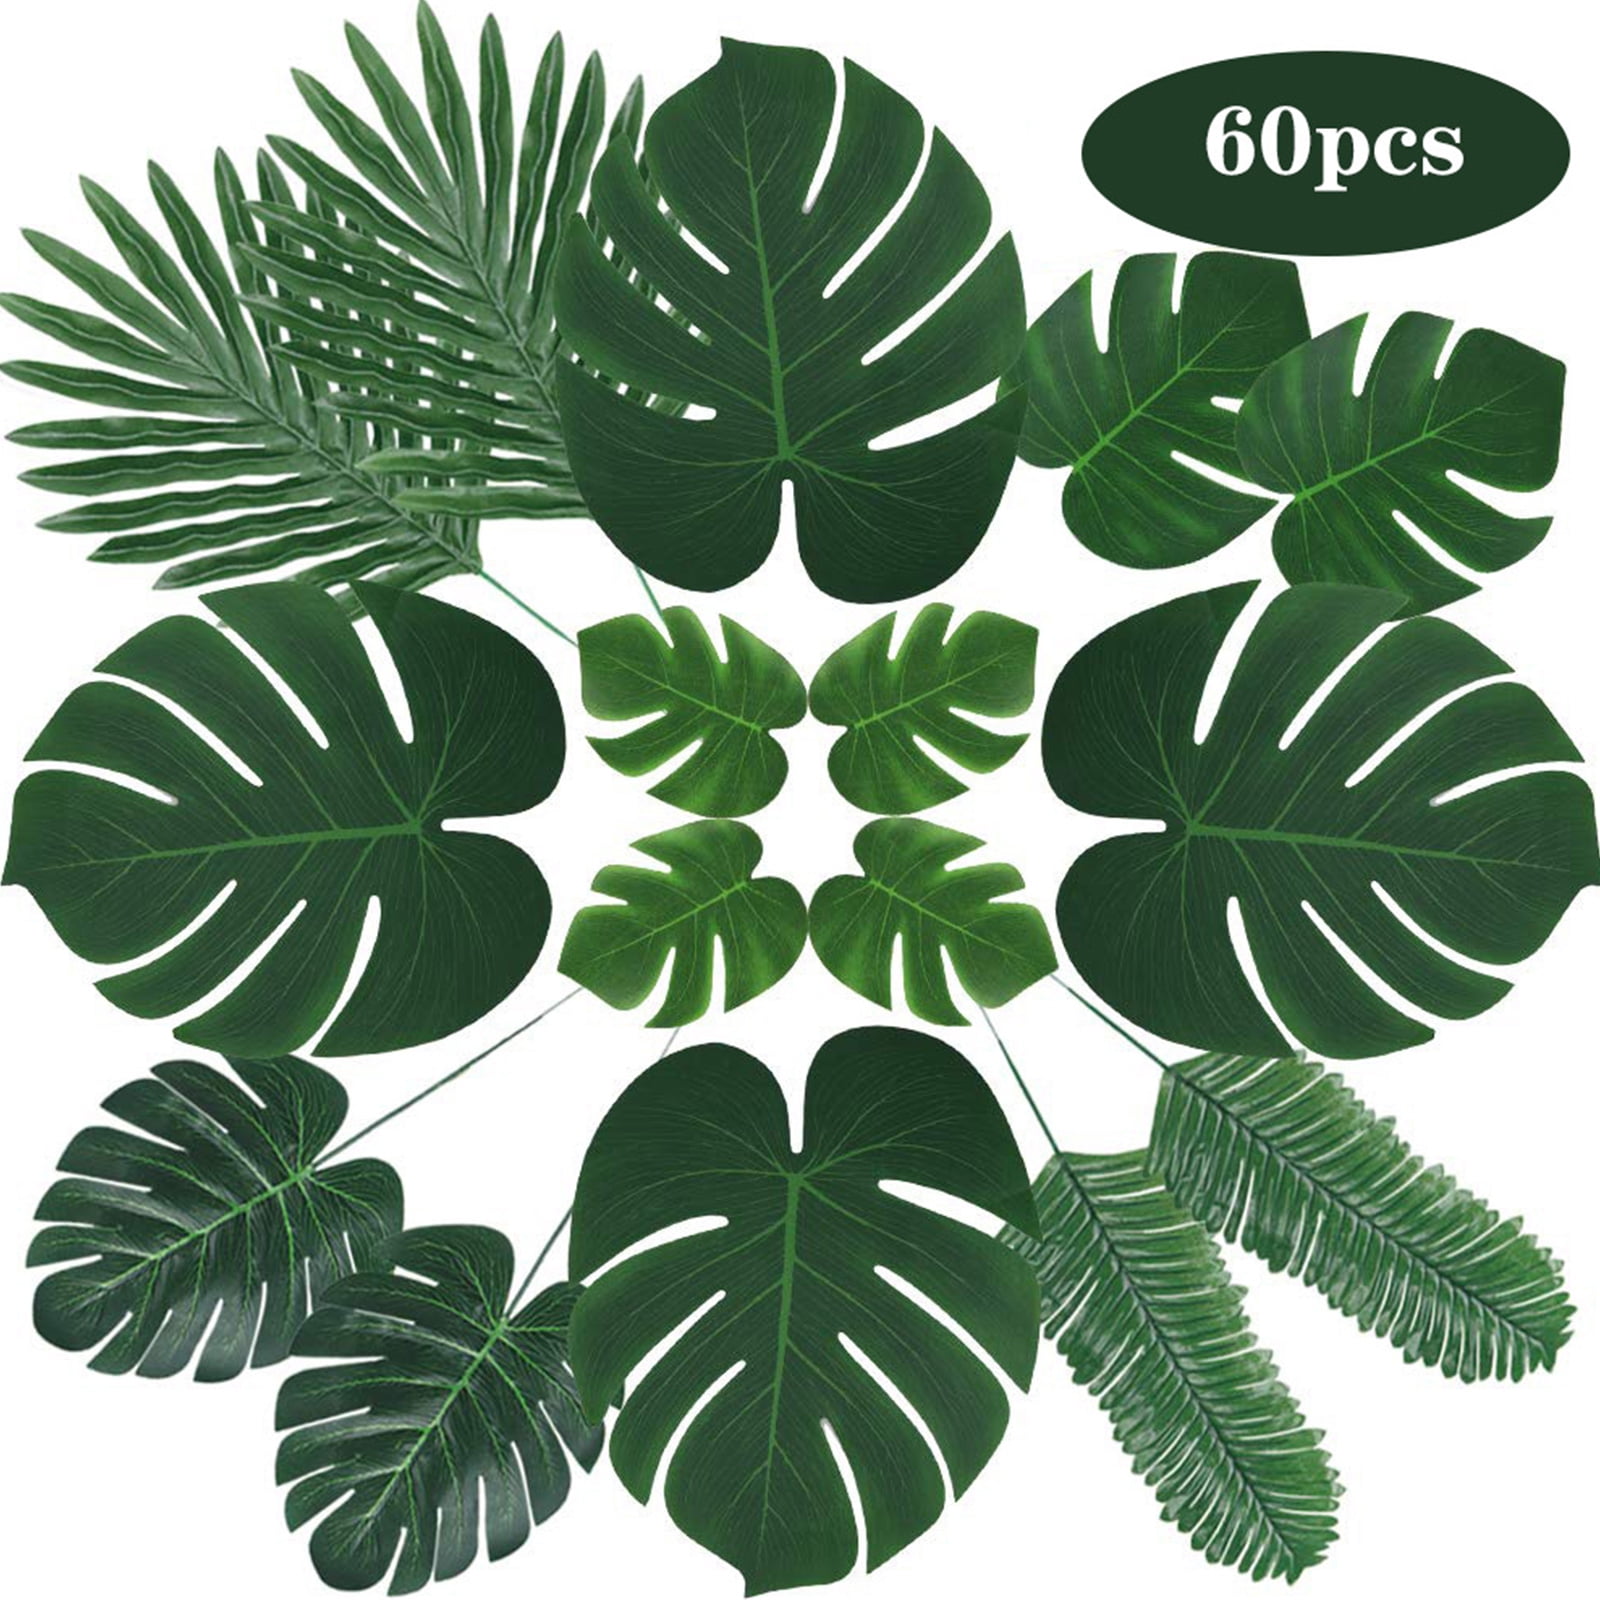 Artificial Ivy Wall Decor Tropical Palm Fake Leaves Artificial Plant Leaf  Home Simulation Leaves For Bookstore From Shuishu, $32.76